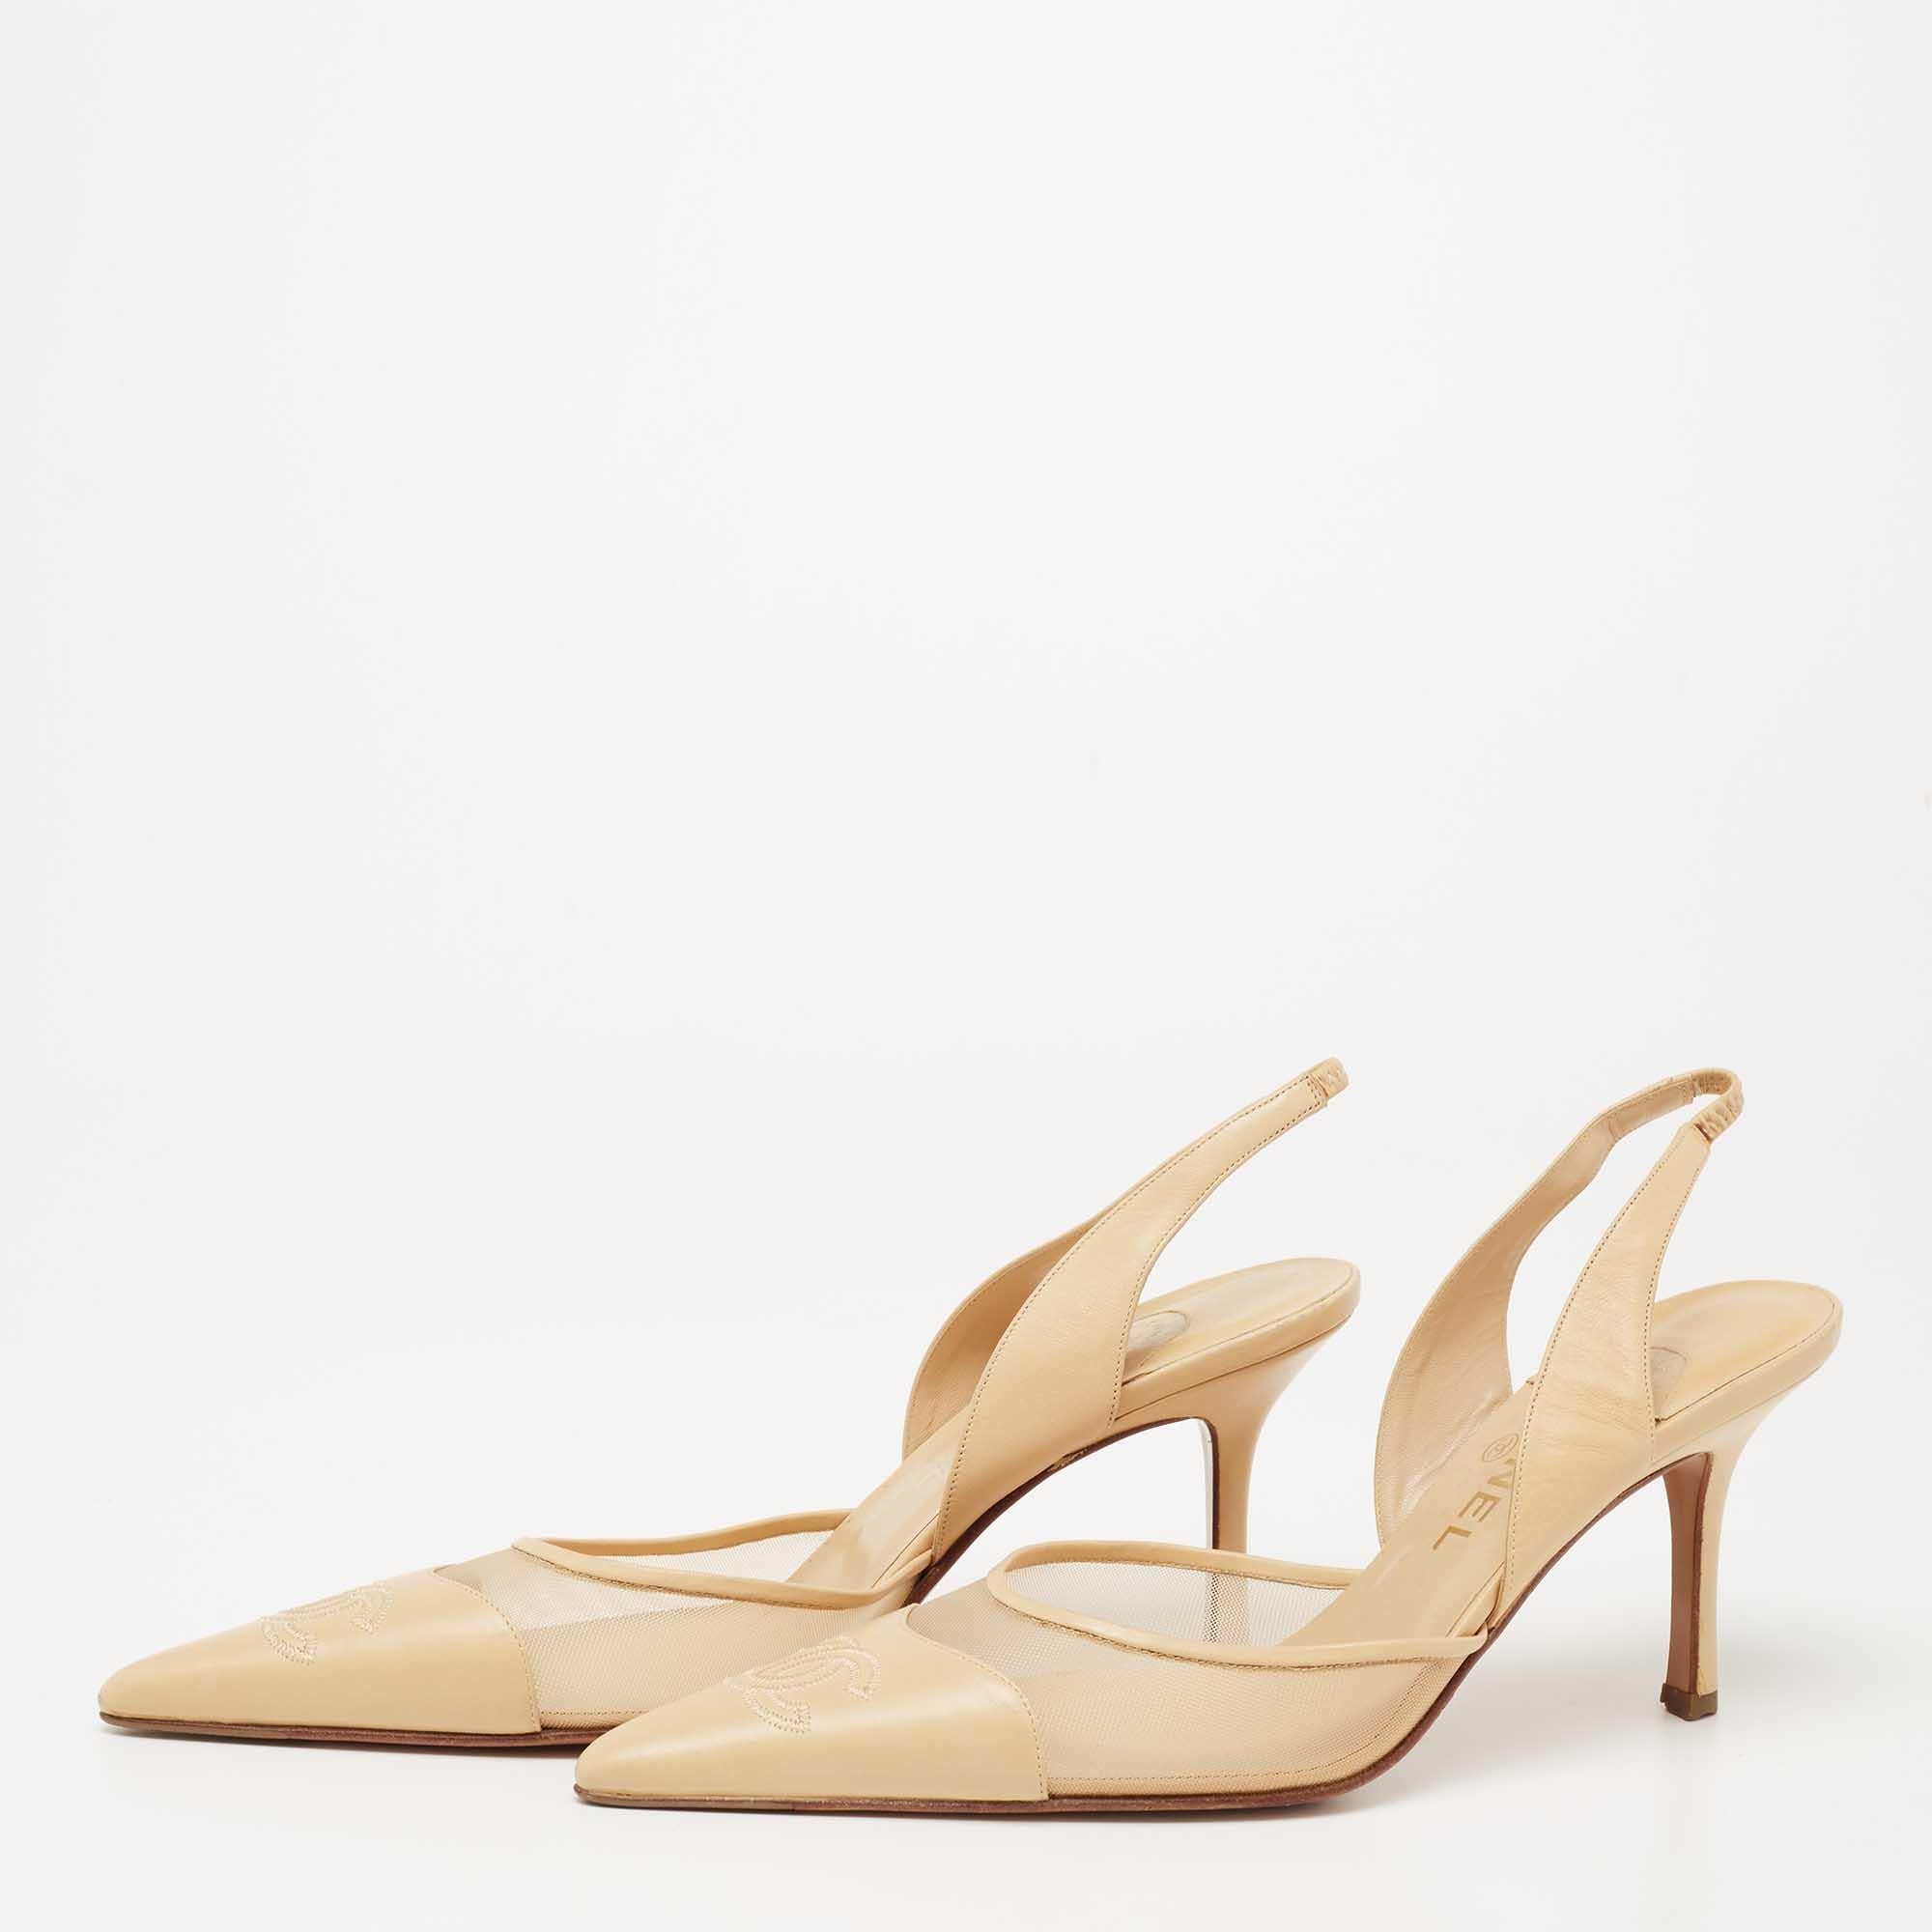 These sandals from the House of Chanel are all about flaunting eternal class and elegance! They are made from beige leather and mesh on the exterior. They feature logo detailing on the pointed toes, a slingback, and 10 cm heels. Flaunt your chic